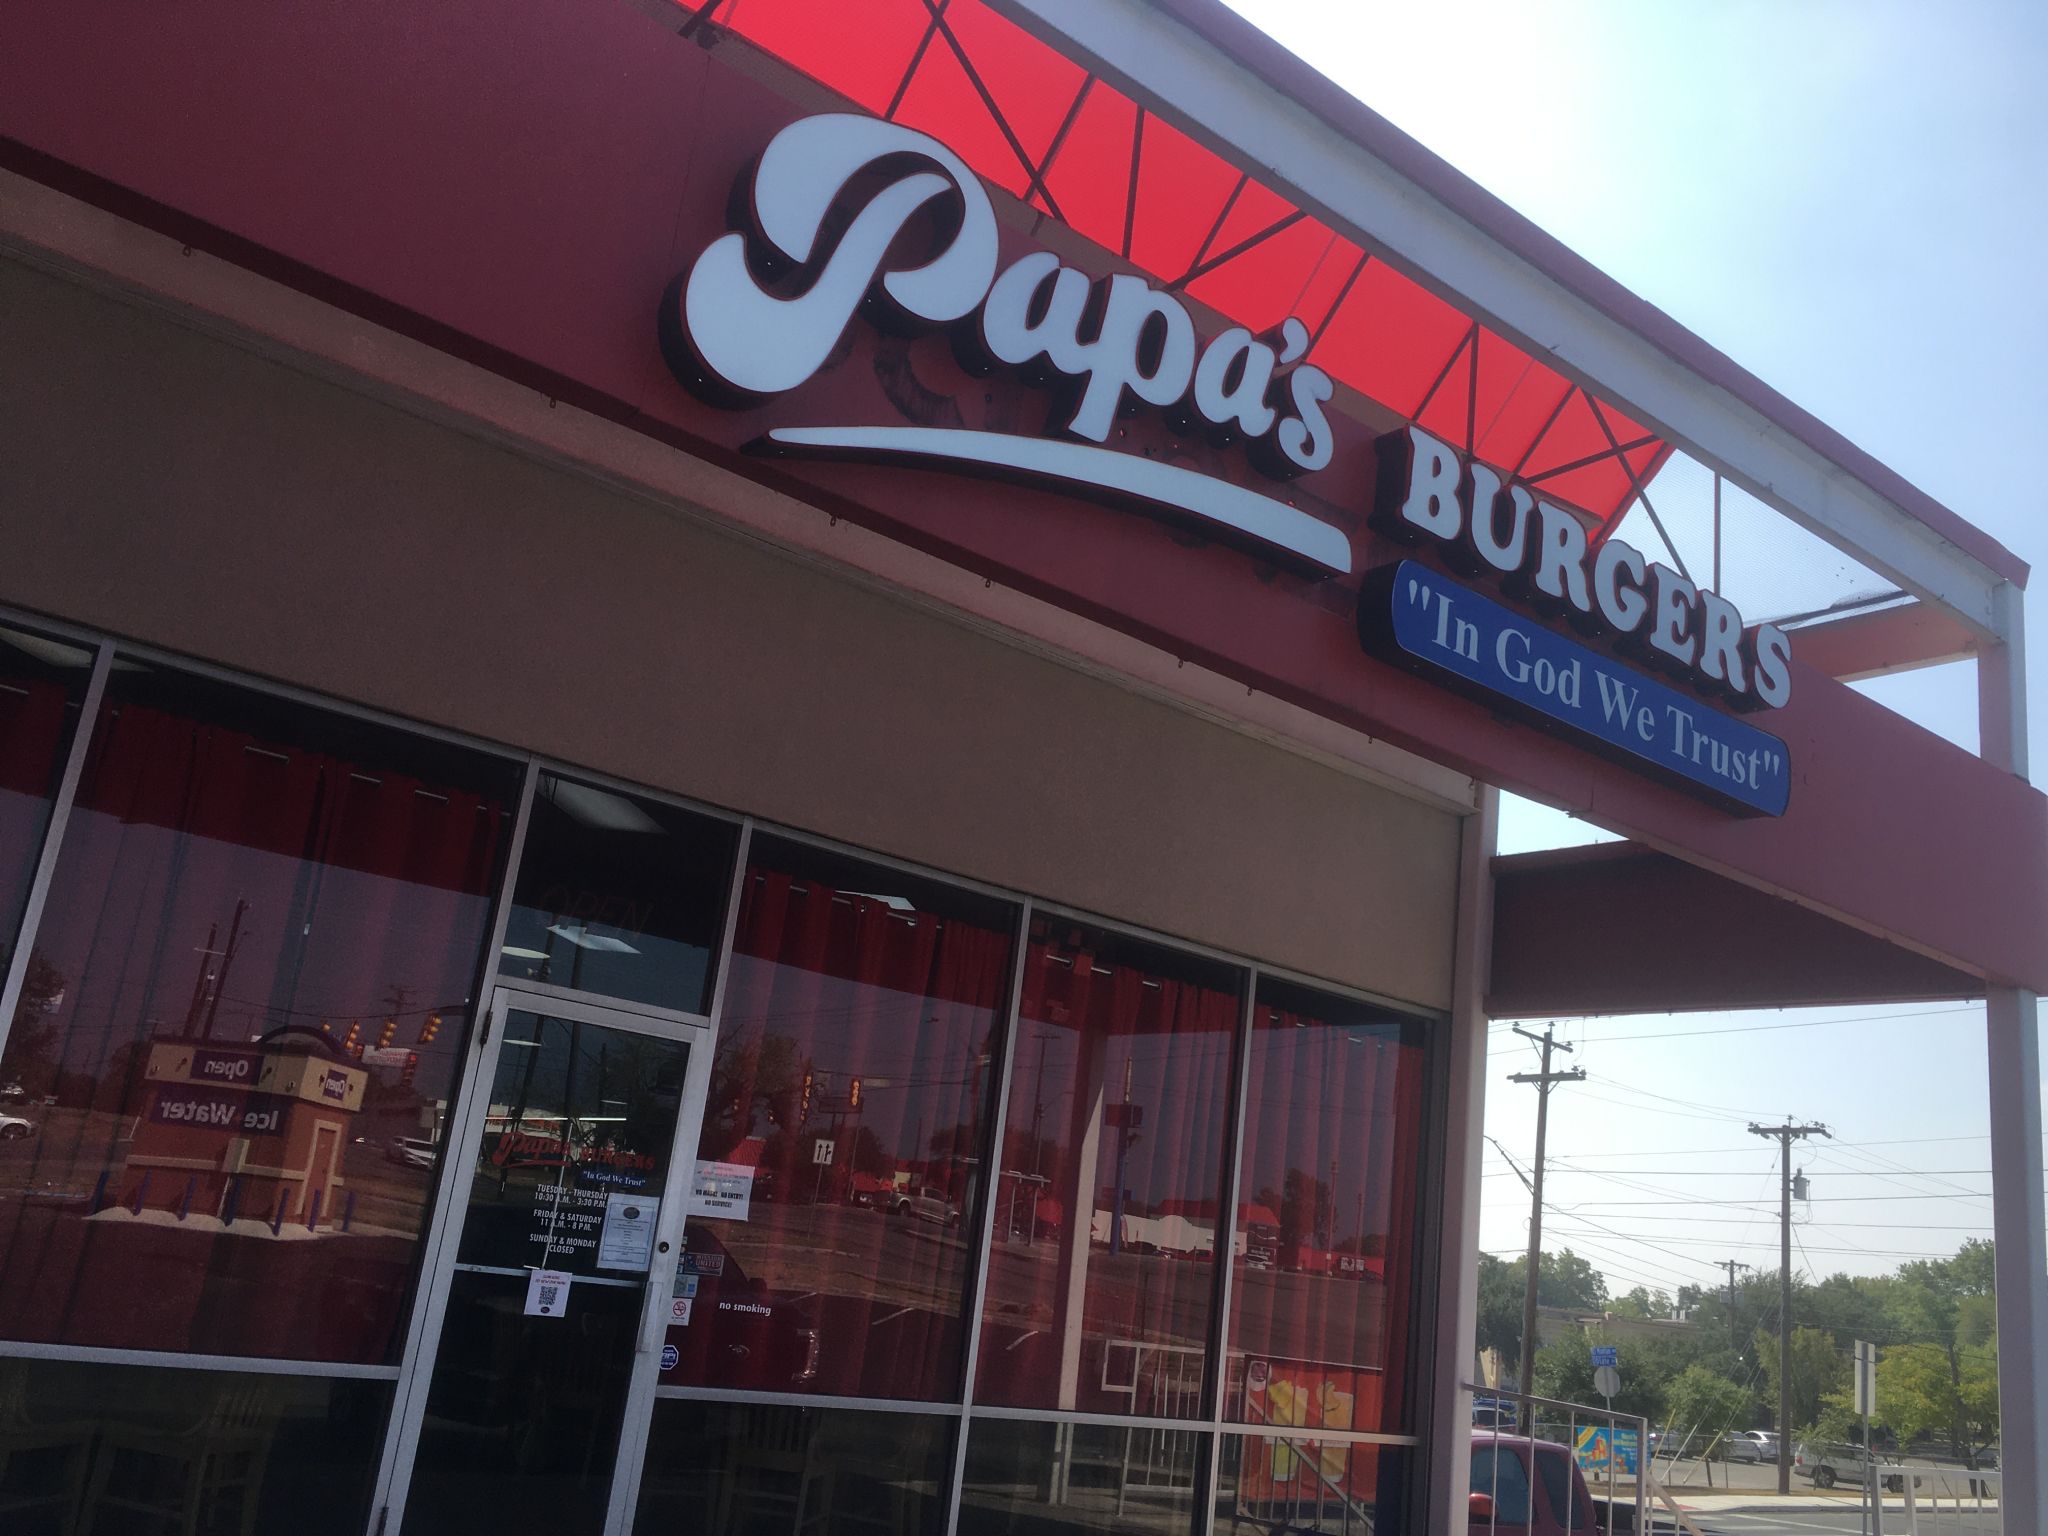 San Antonio's Papa's Burgers shares new name after legal scuffle with  Houston's Pappas family, San Antonio